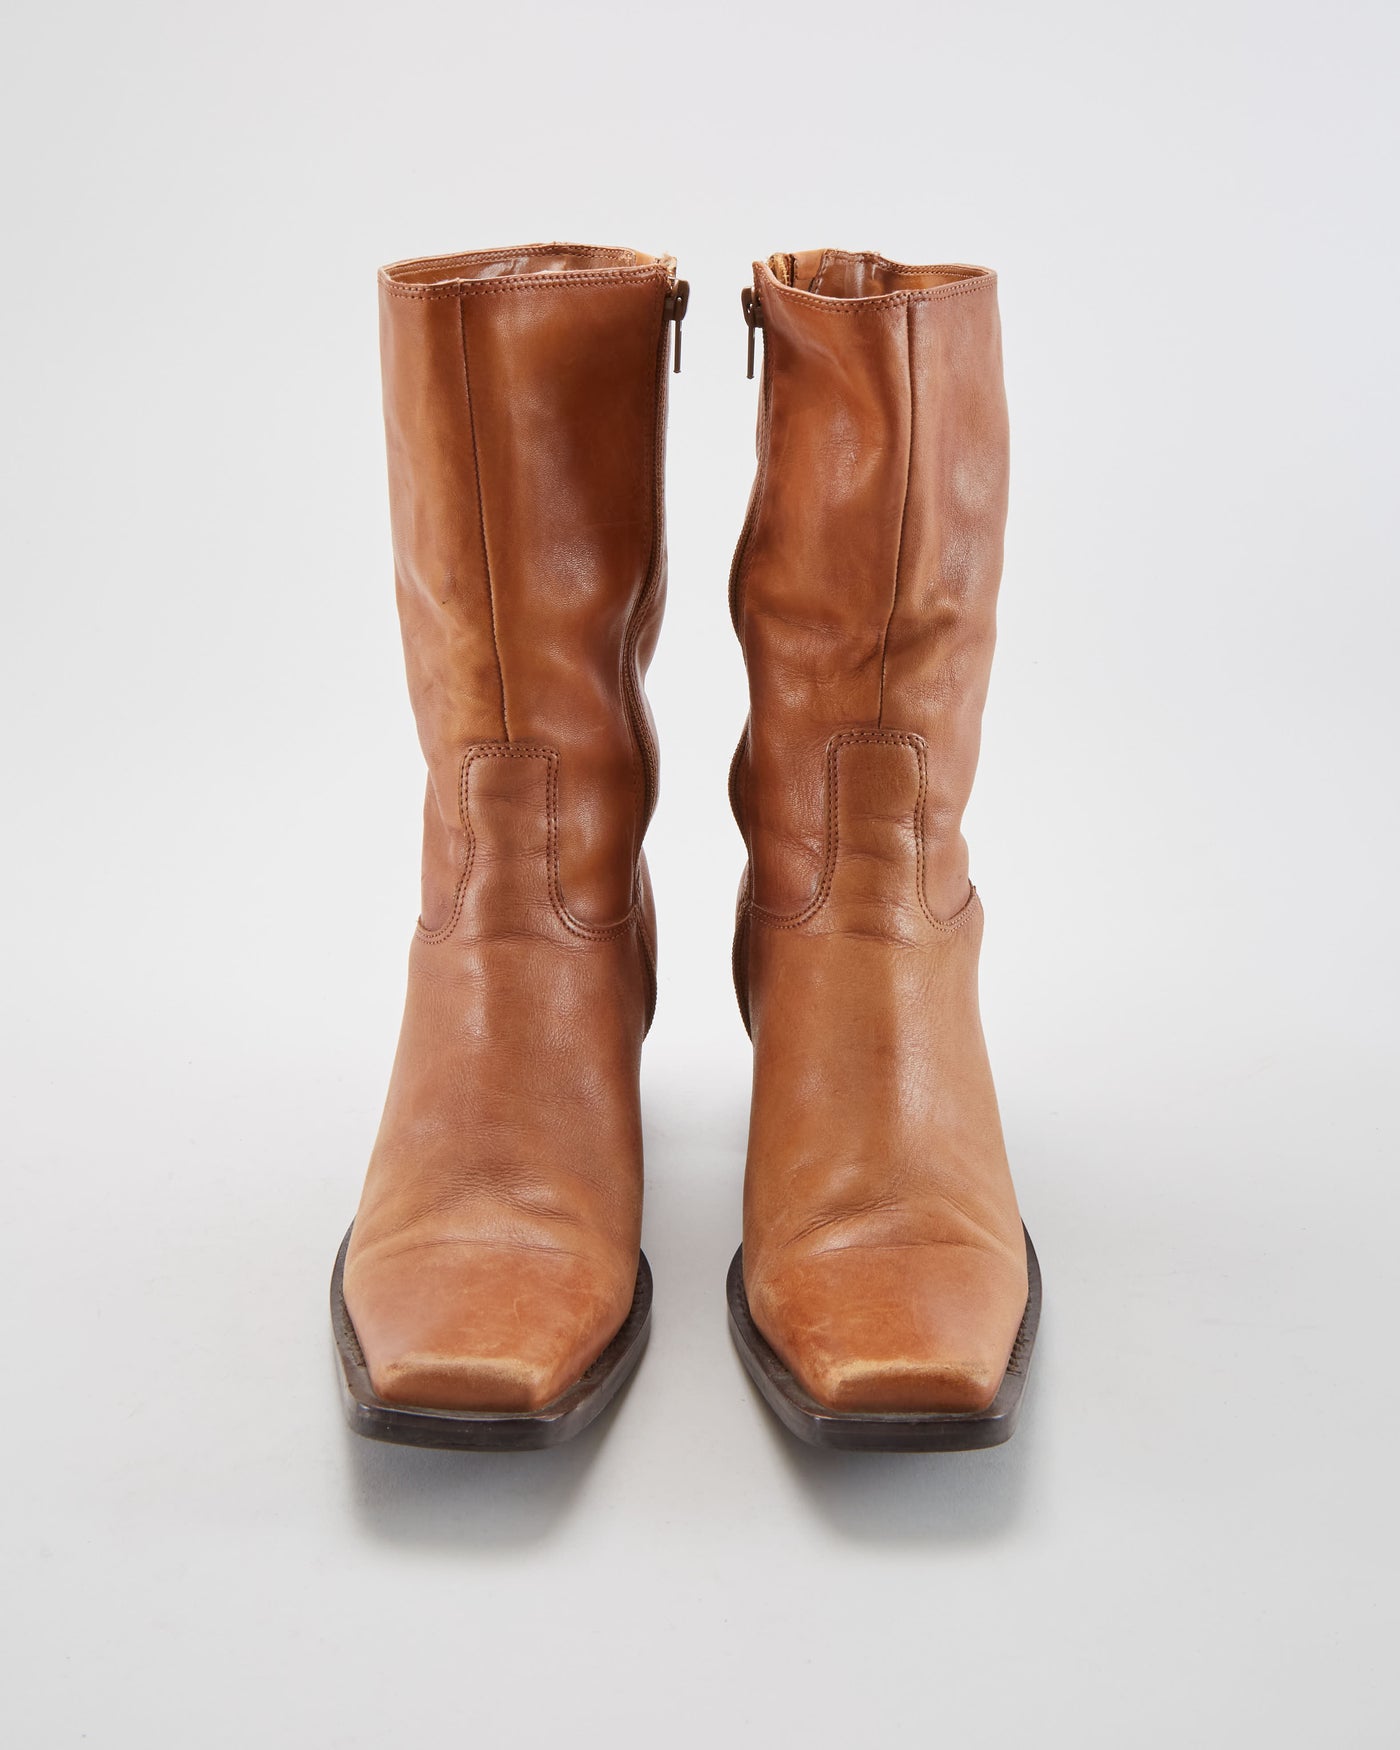 Vintage Square Toe Leather Brown Boots - Womens UK 8